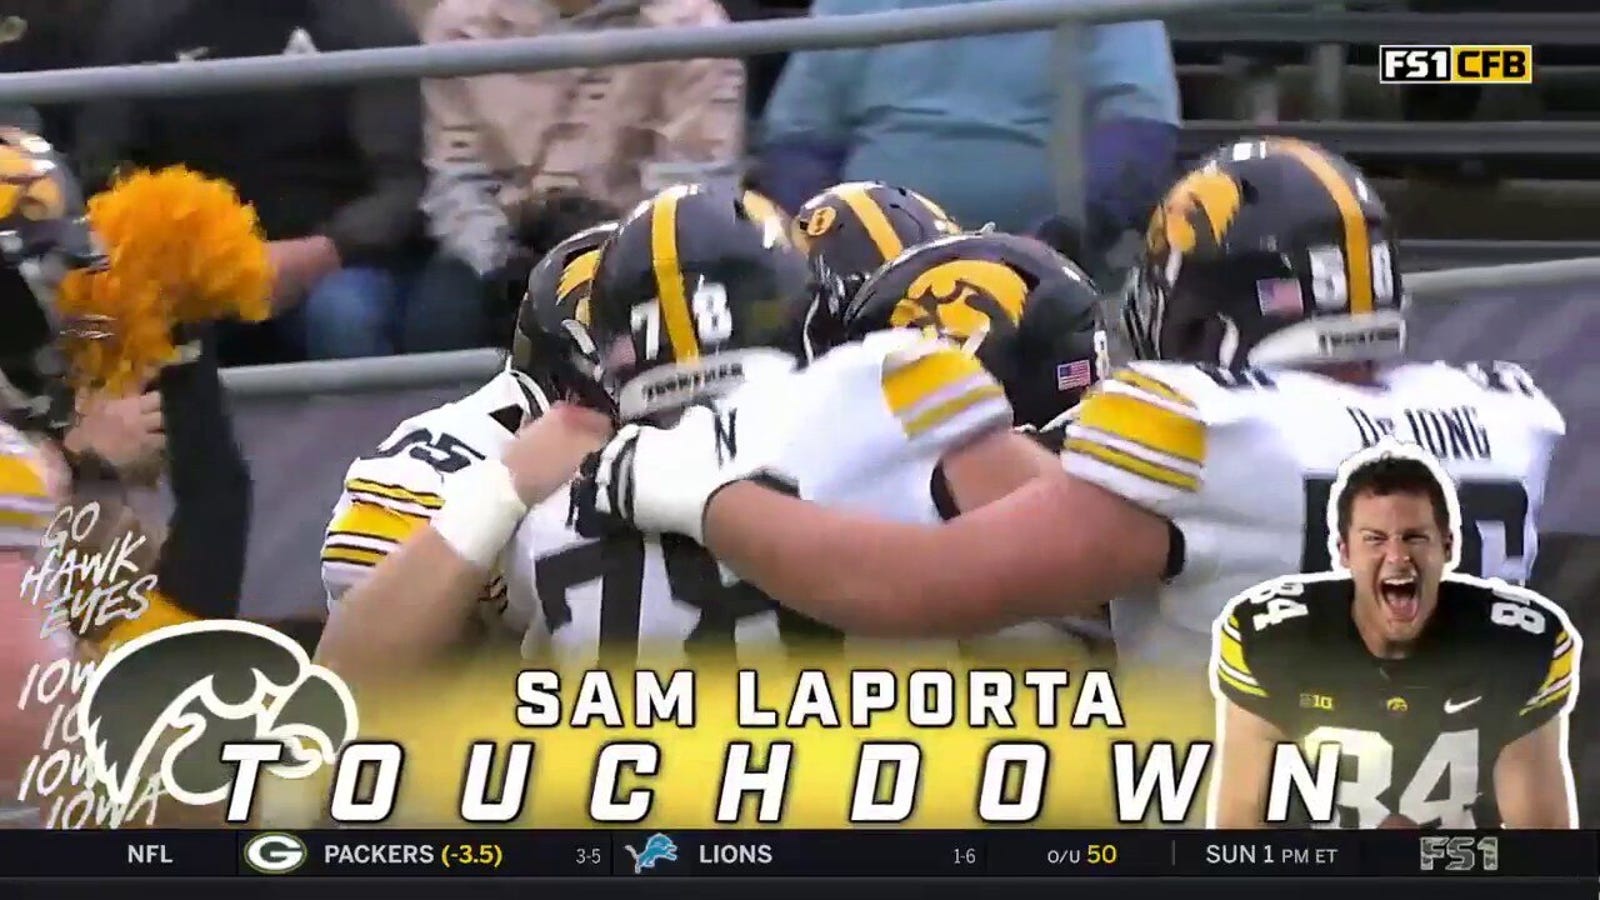 Spencer Petras connects with Sam LaPorta for a 16-yard touchdown as Iowa takes a 7-0 lead over Purdue